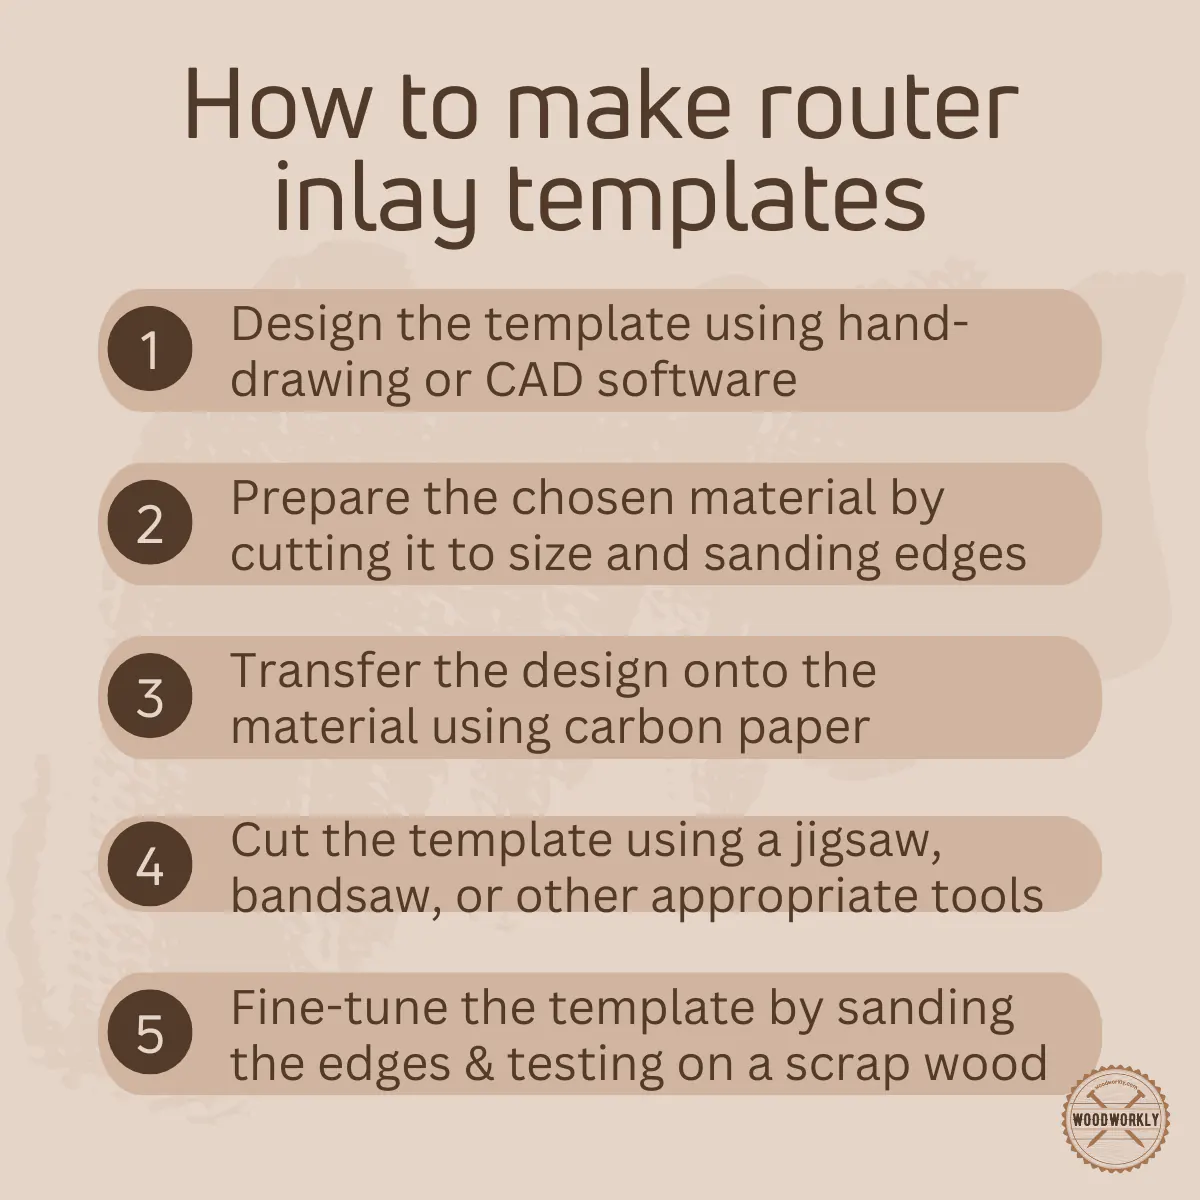 How to make router inlay templates